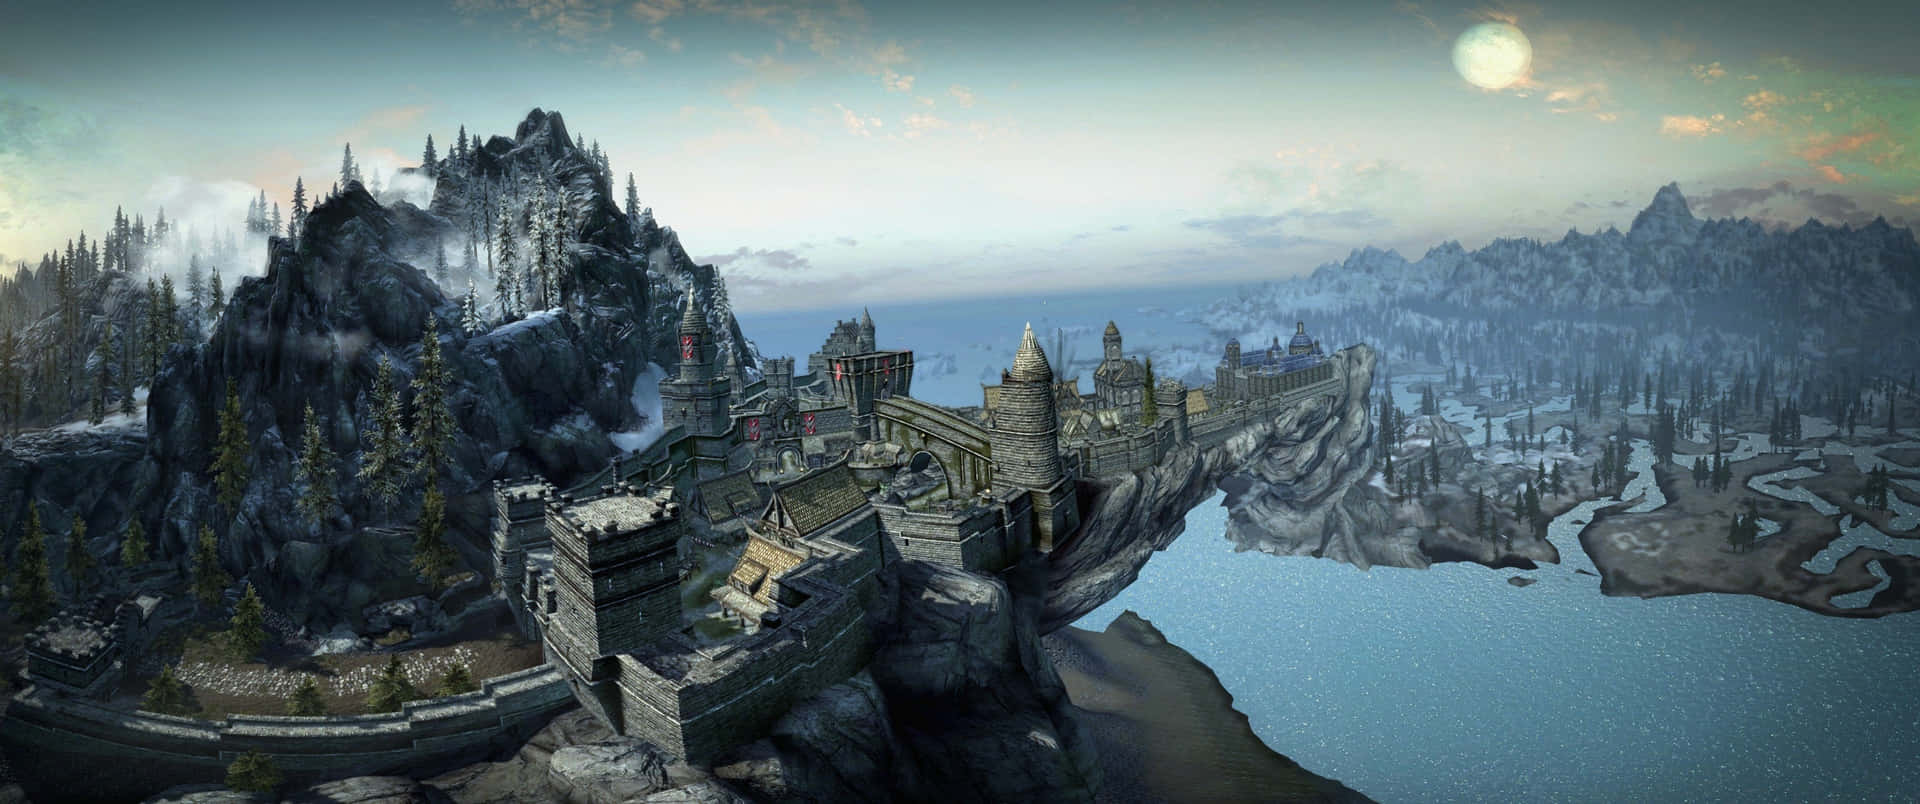 The majestic city of Solitude in Skyrim, towering over a stunning landscape. Wallpaper